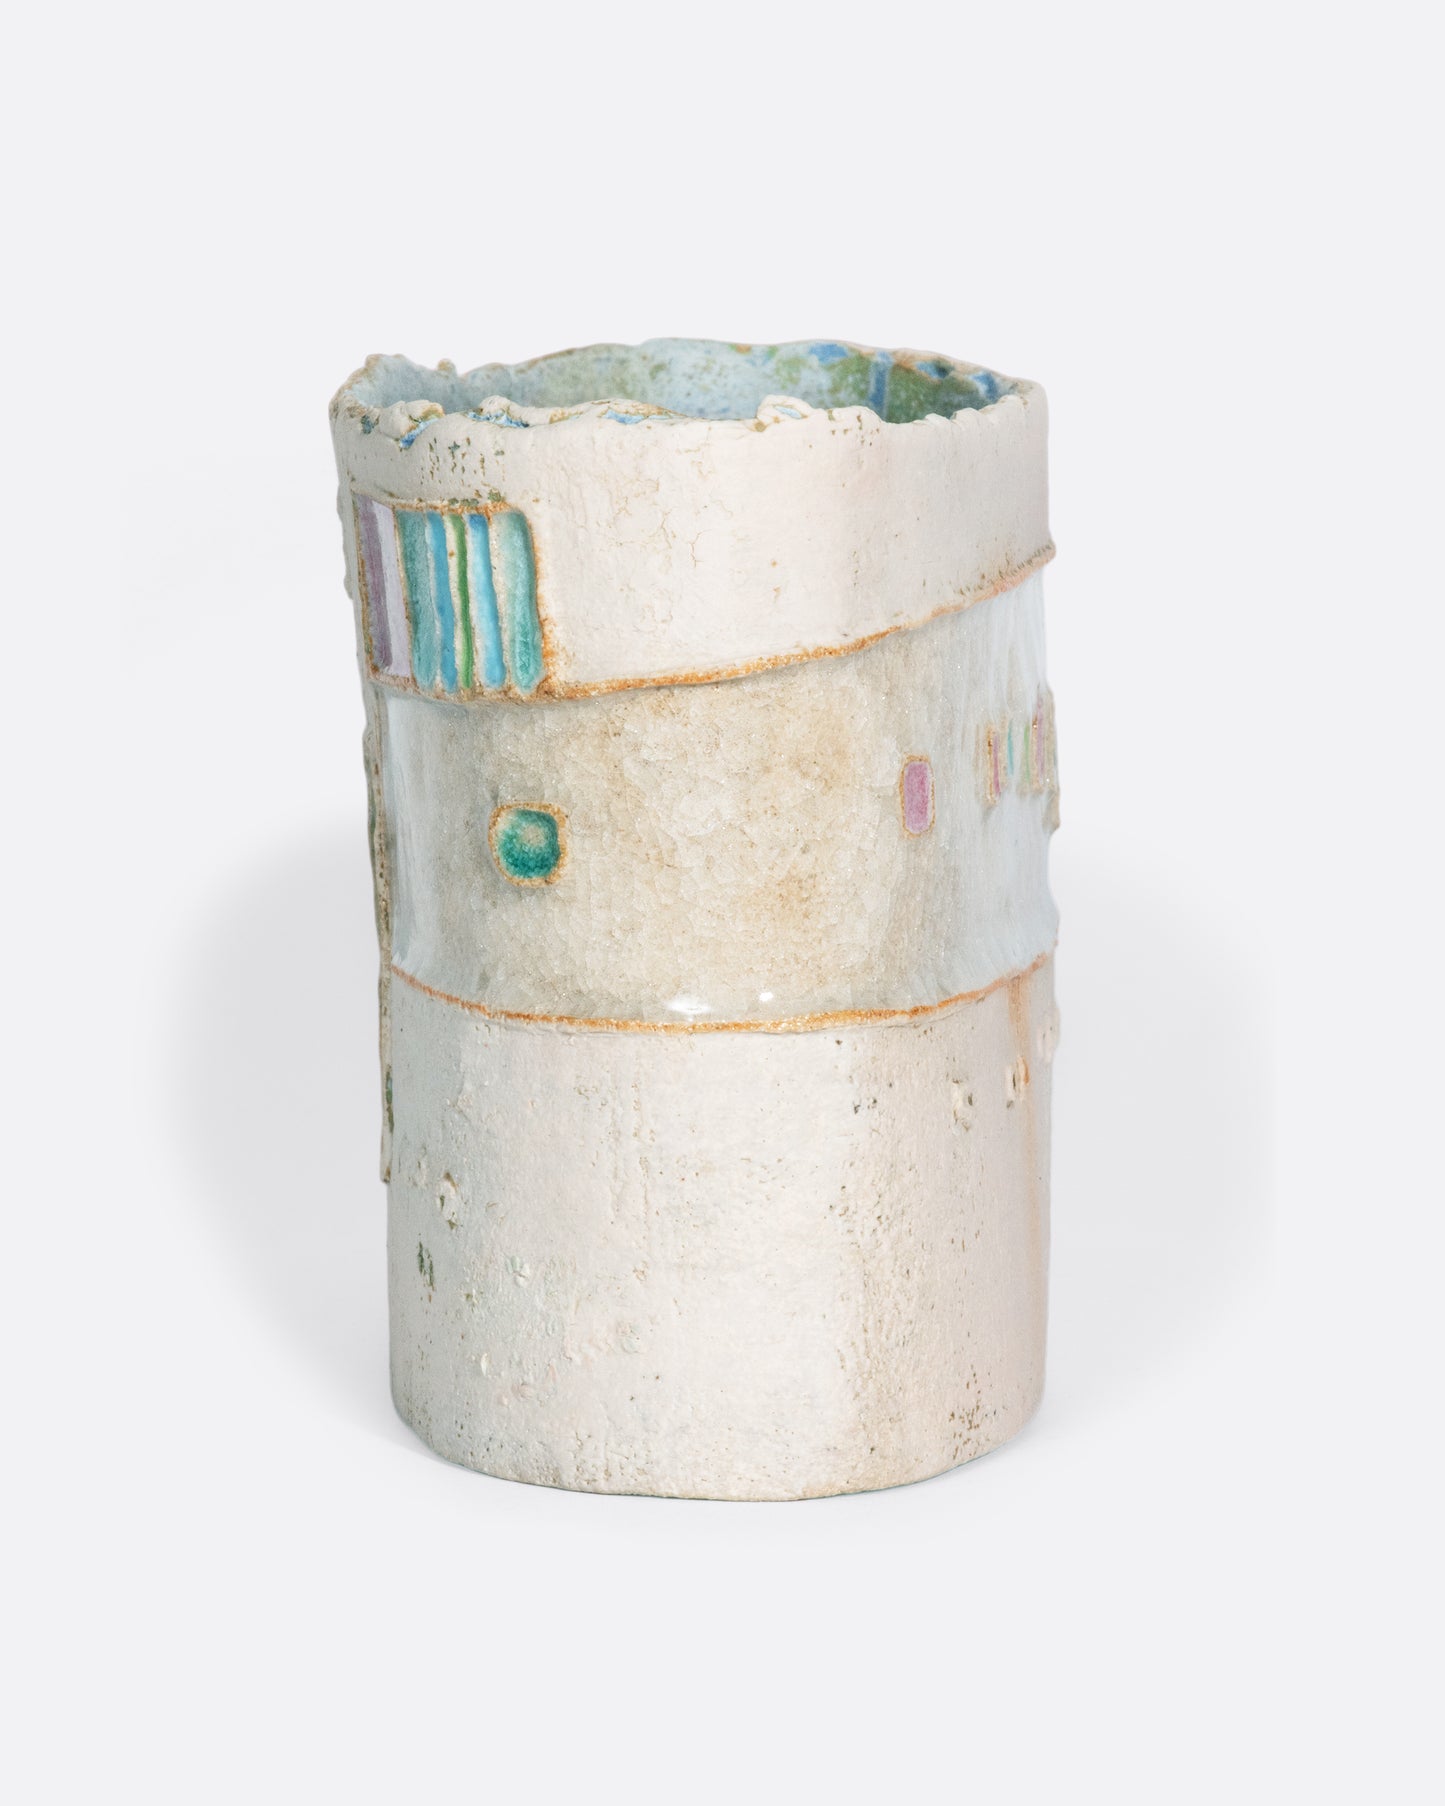 A ceramic vessel meticulously handmade with many layers of glaze atop stoneware clay. The rich, varied texture becomes a beautiful canvas for a dreamy slice of a sun-drenched town in Greece.